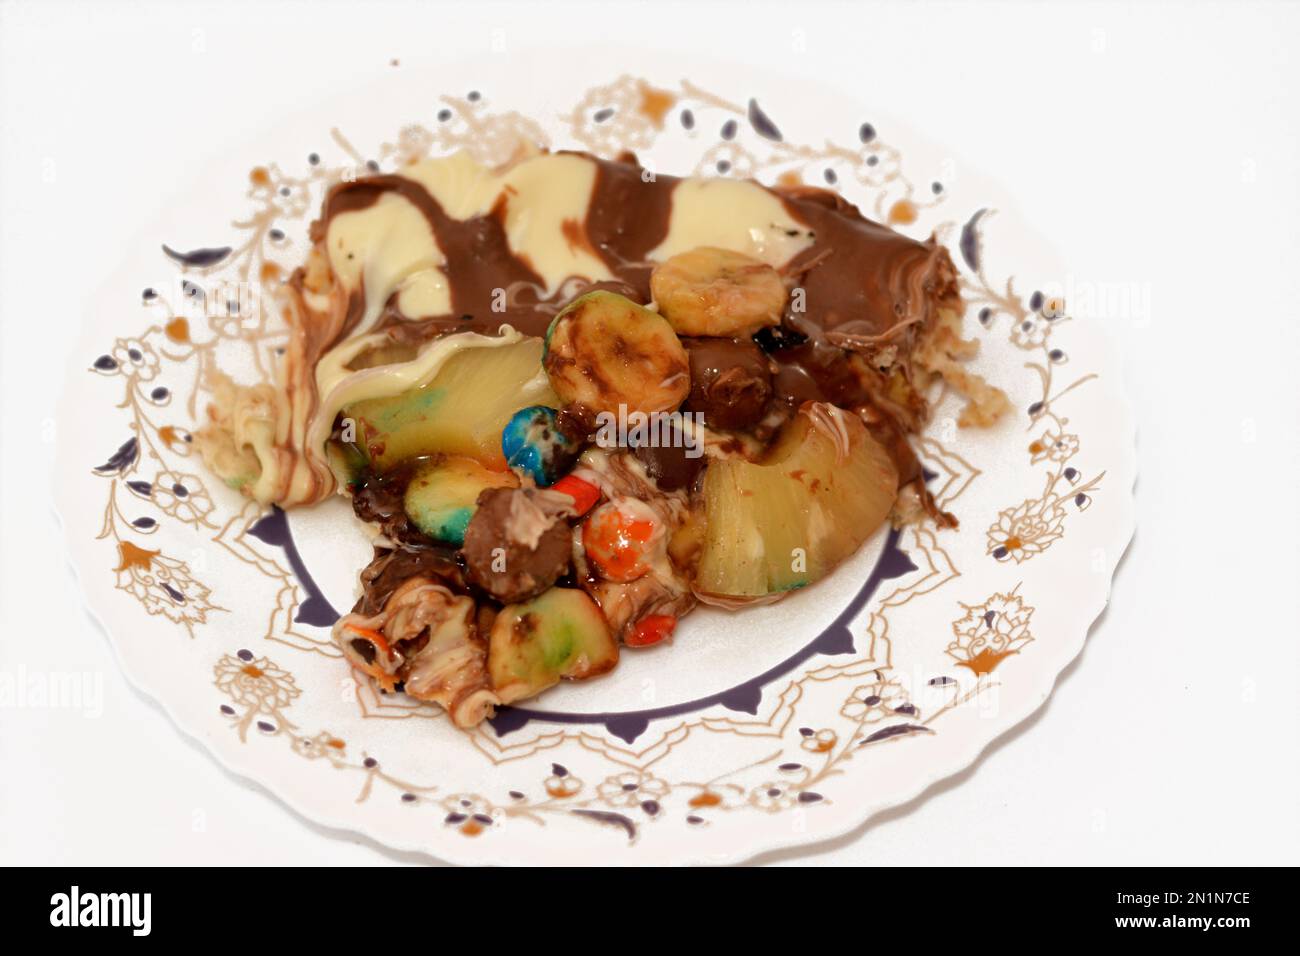 Chocolate mixture with biscuit and different types of chocolate pieces and cream with fresh pineapple ananas and bananas pieces on top on a dough bake Stock Photo